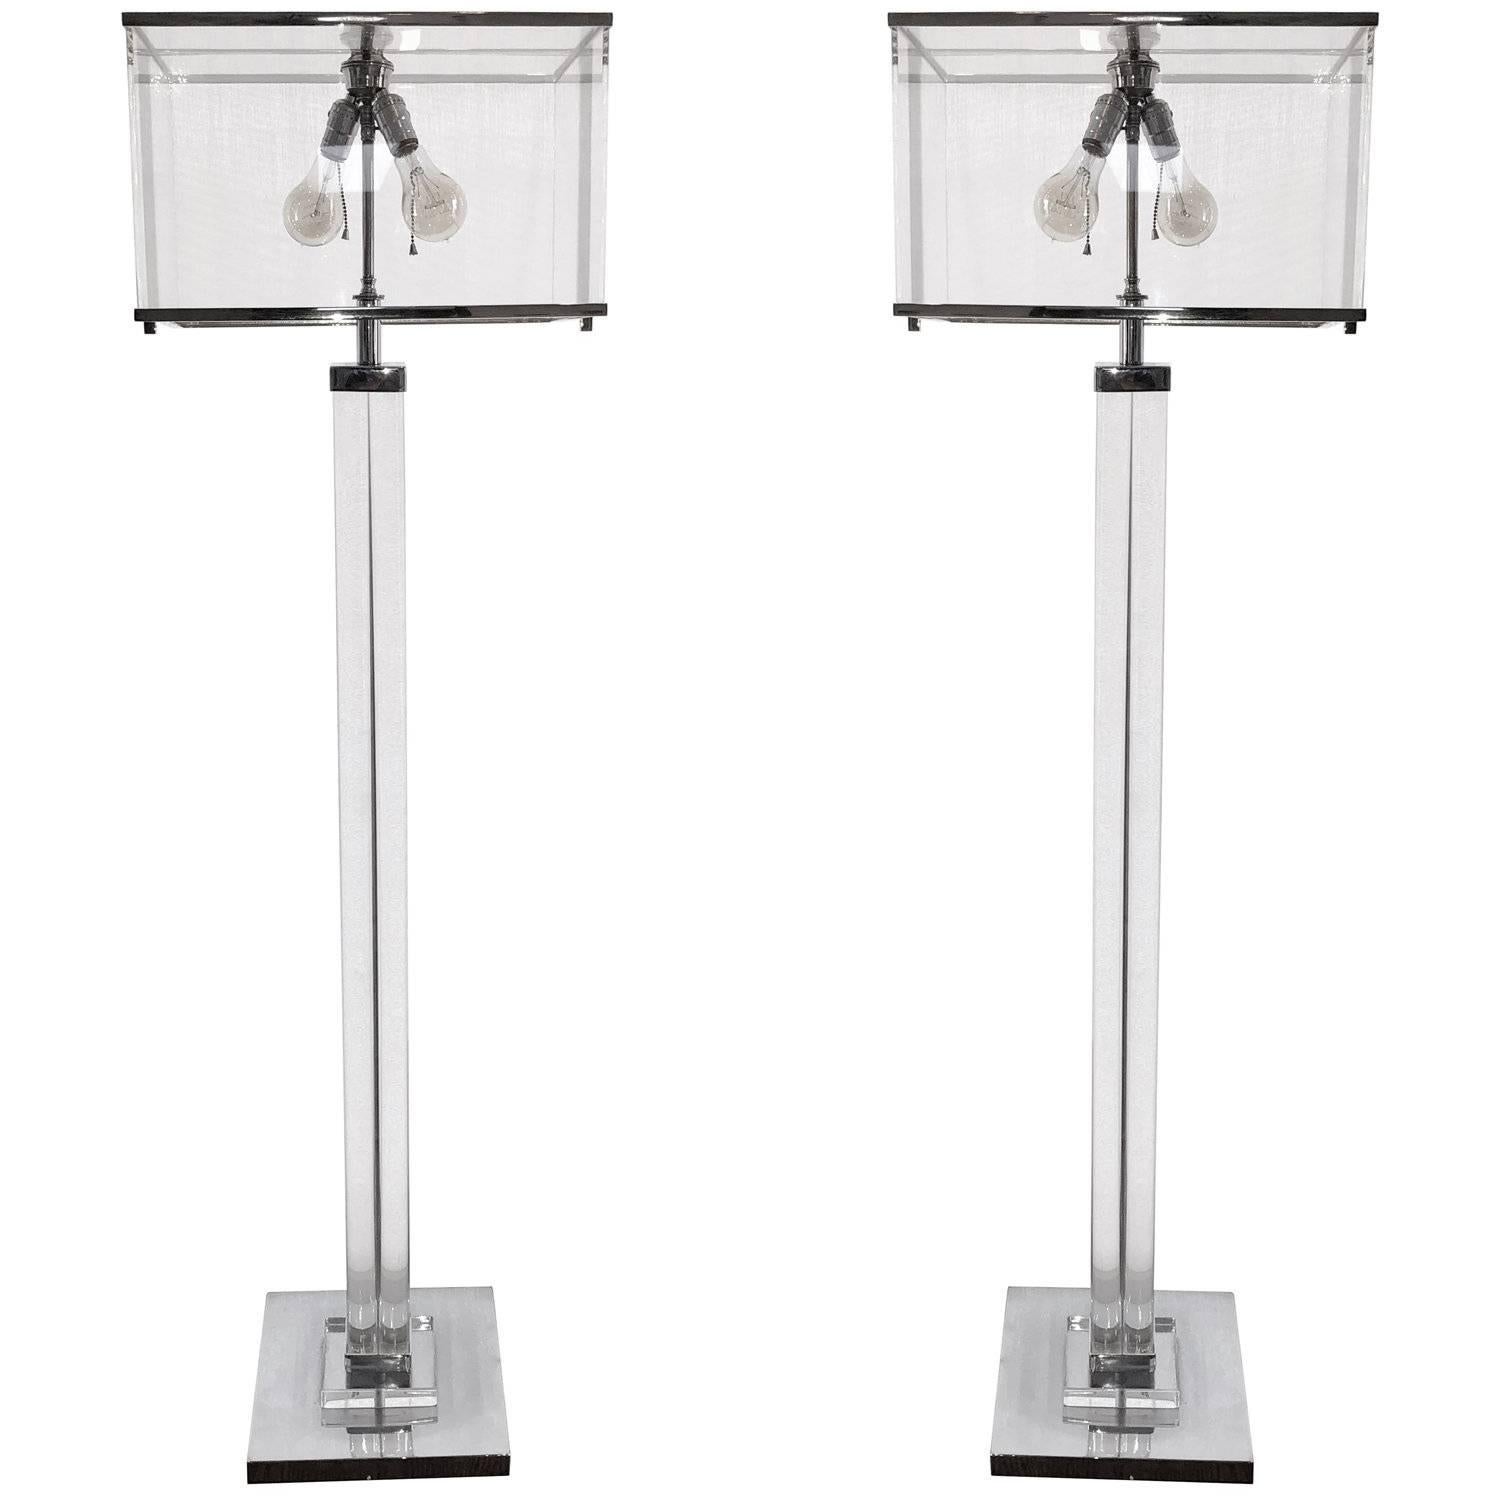 Charles Hollis Jones "Edison" Floor Lamp in Lucite and Polished Nickel For Sale